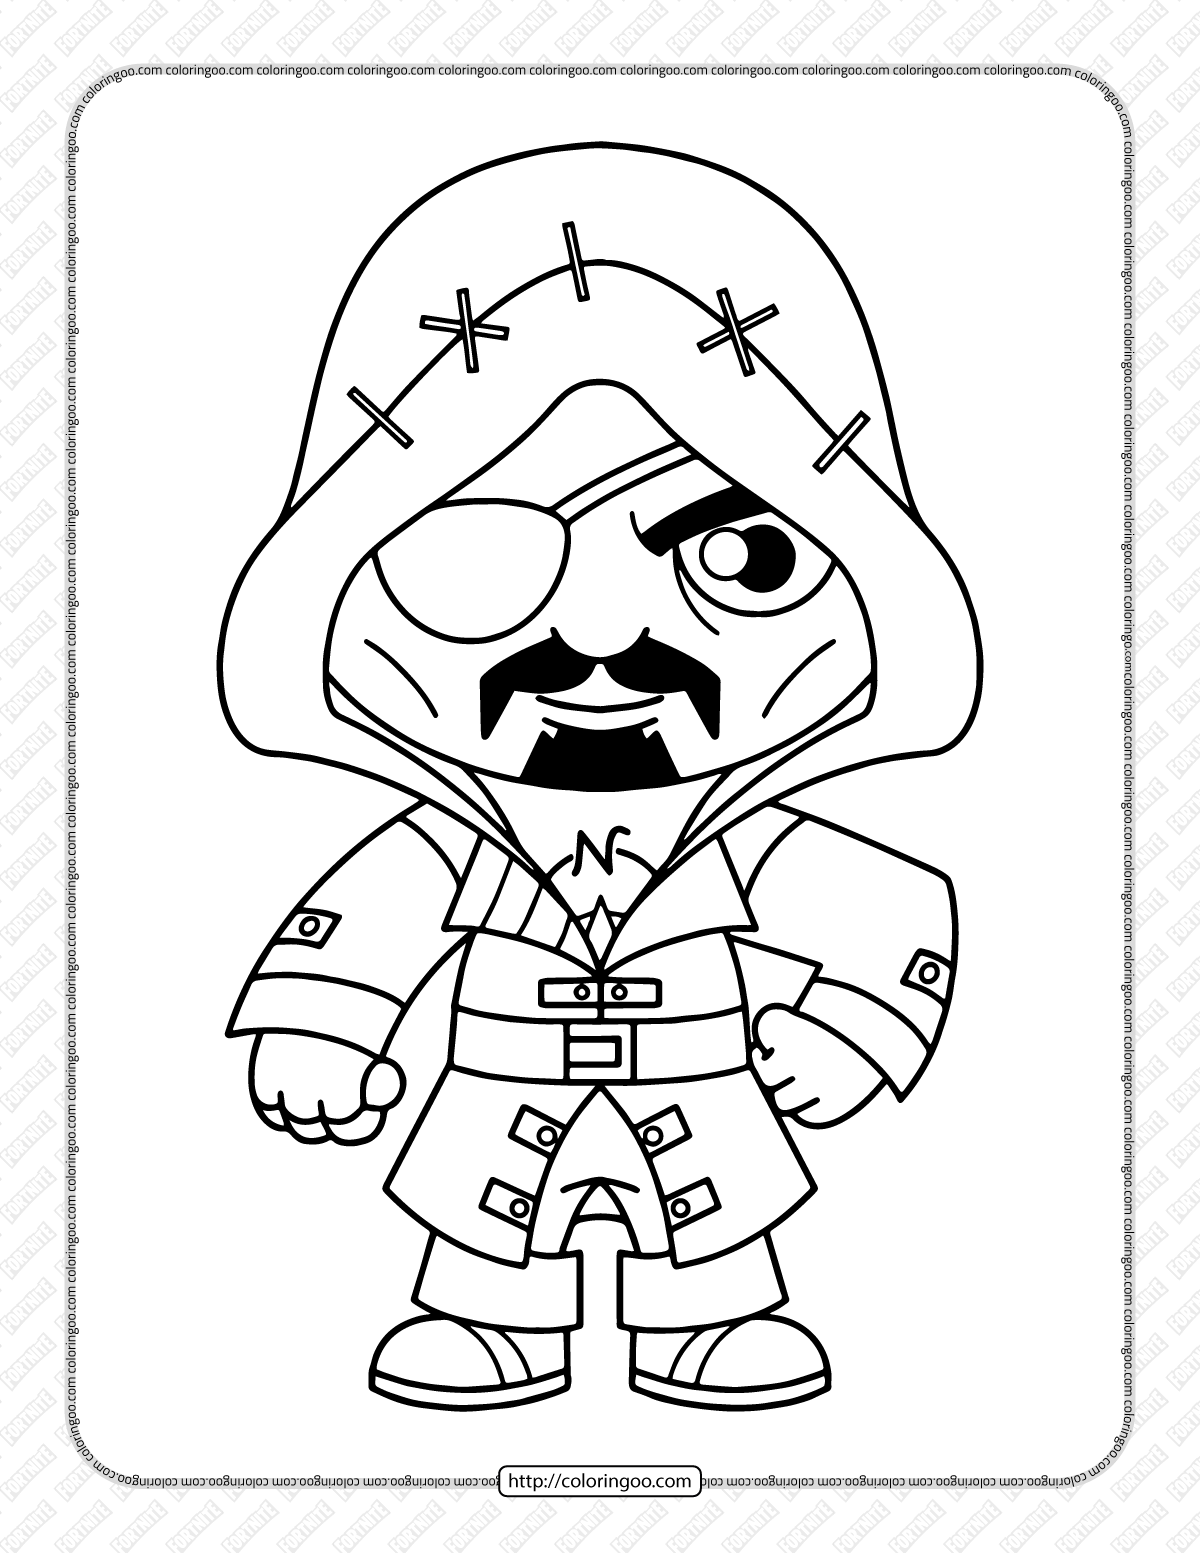 chibi fortnite coloring pages 39